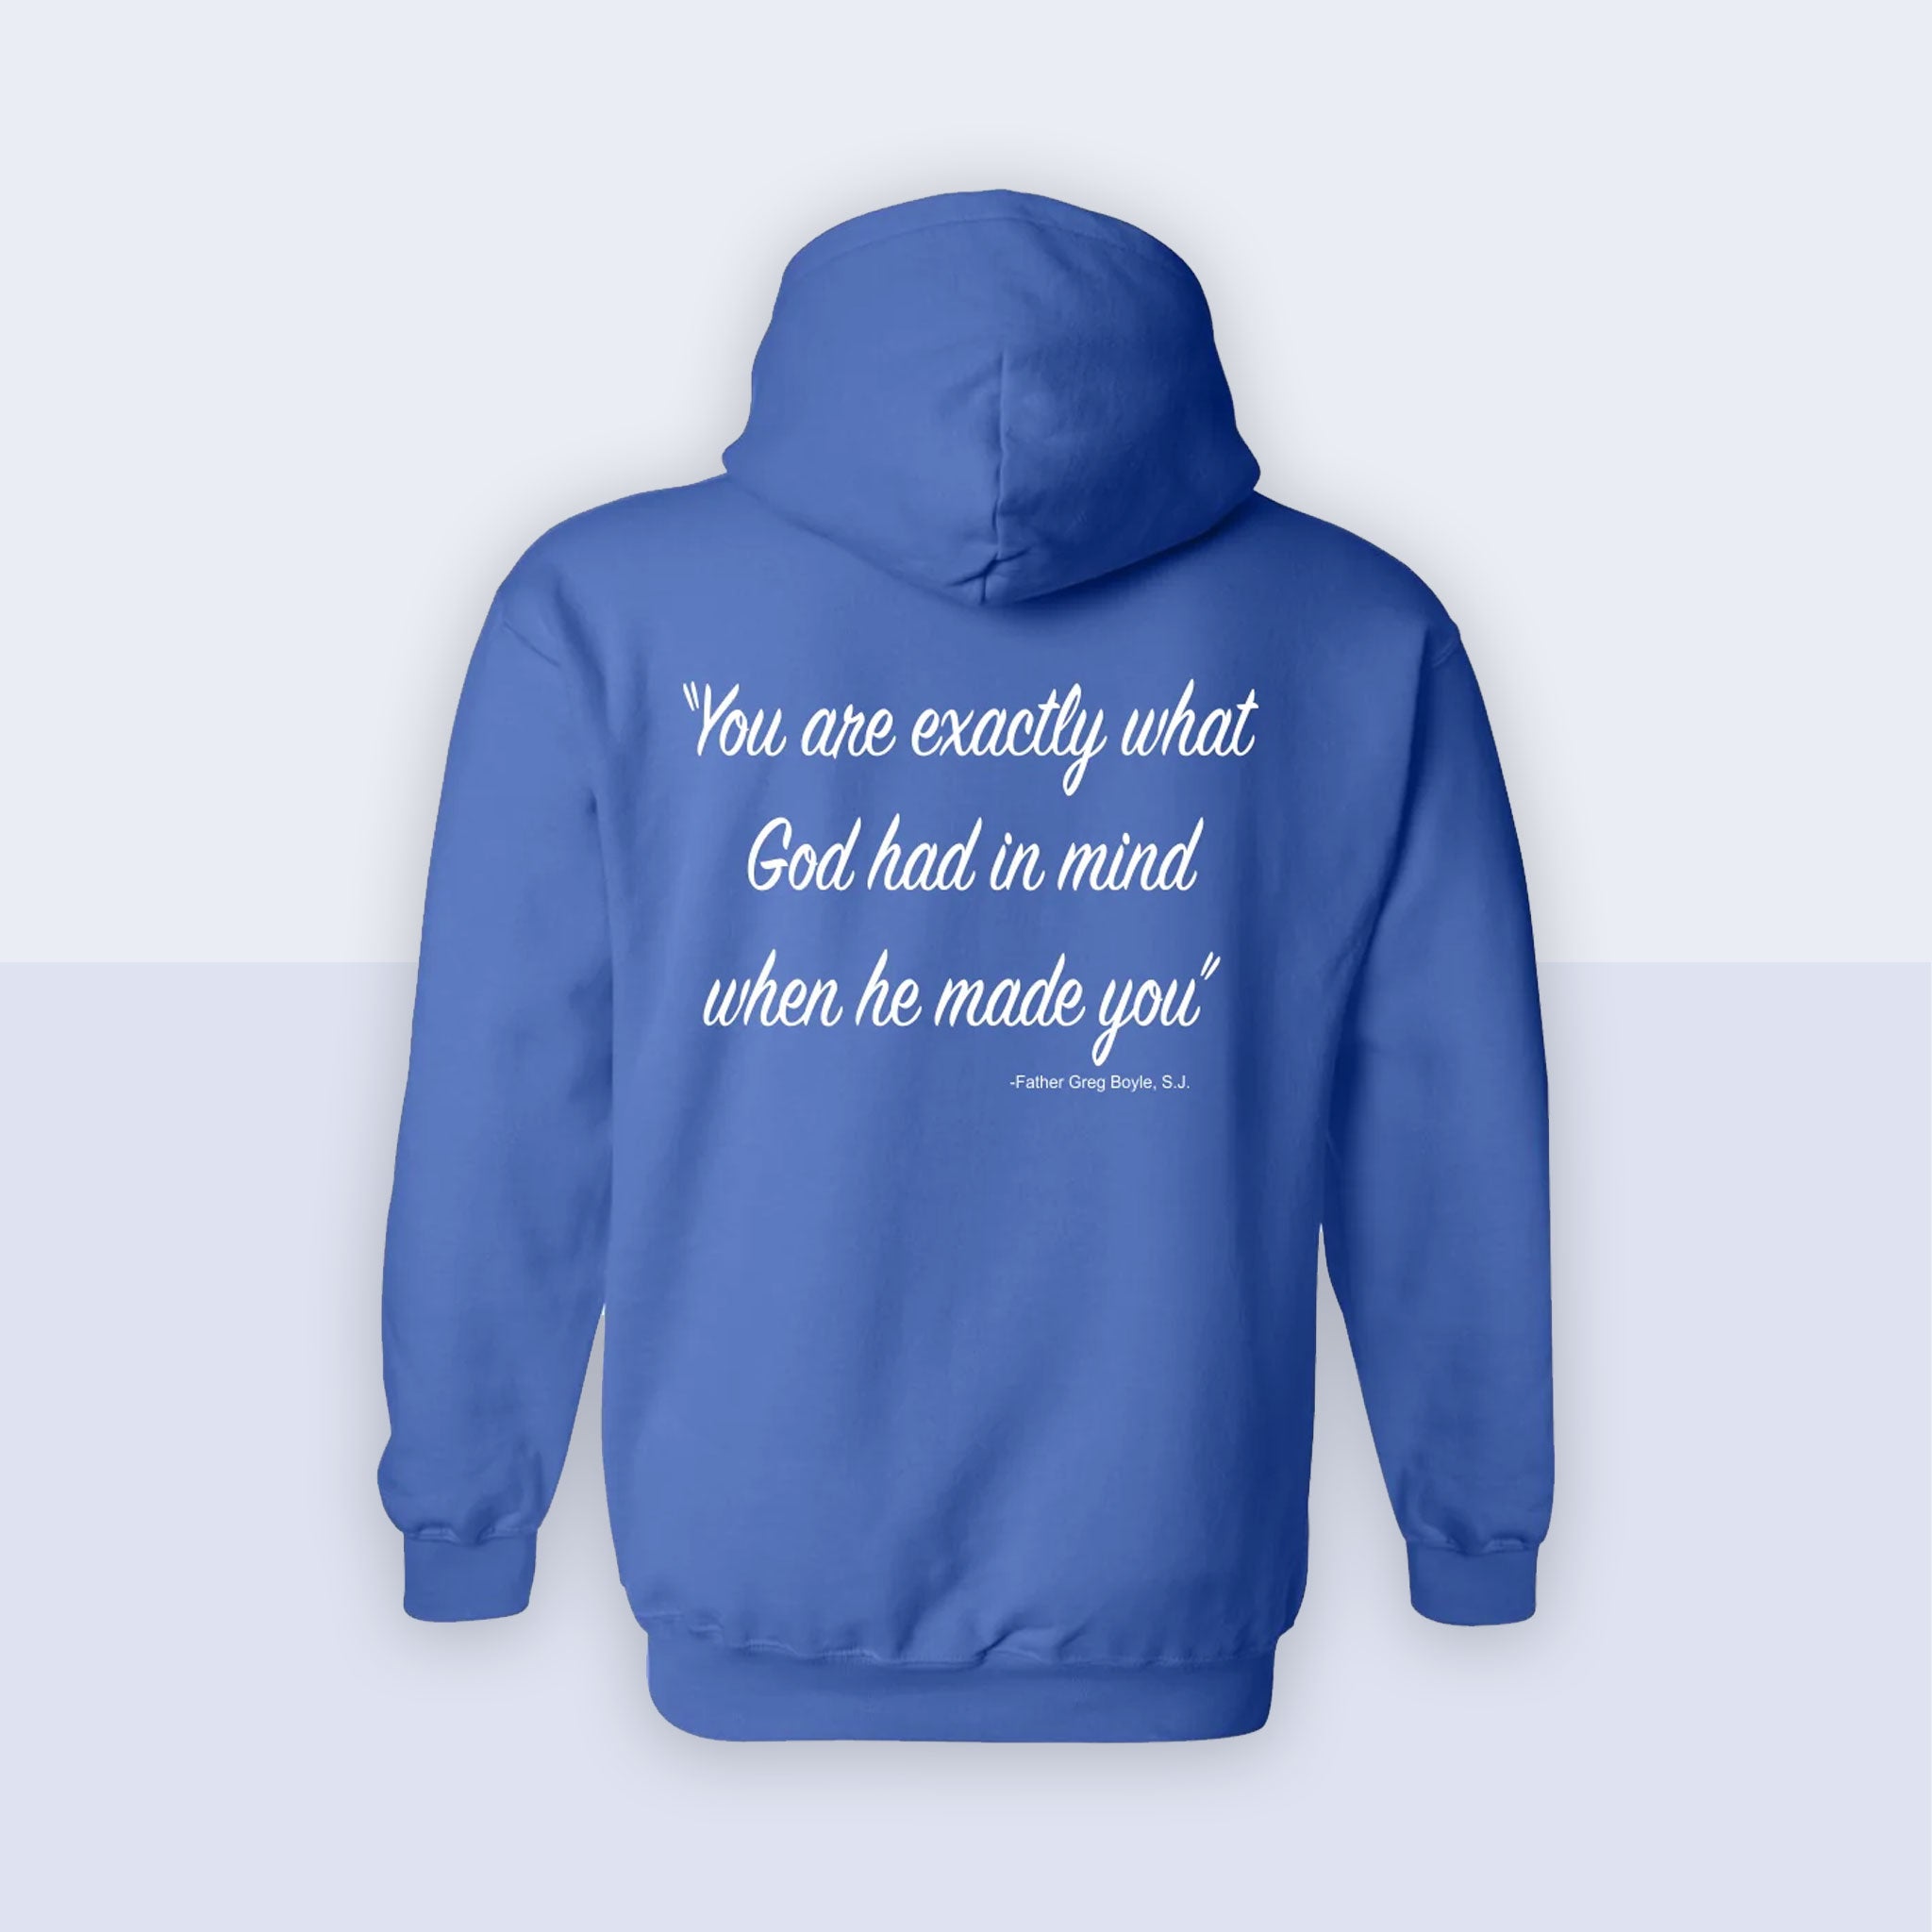 You-Are-Exactly_-Hoodie_blue2.jpg